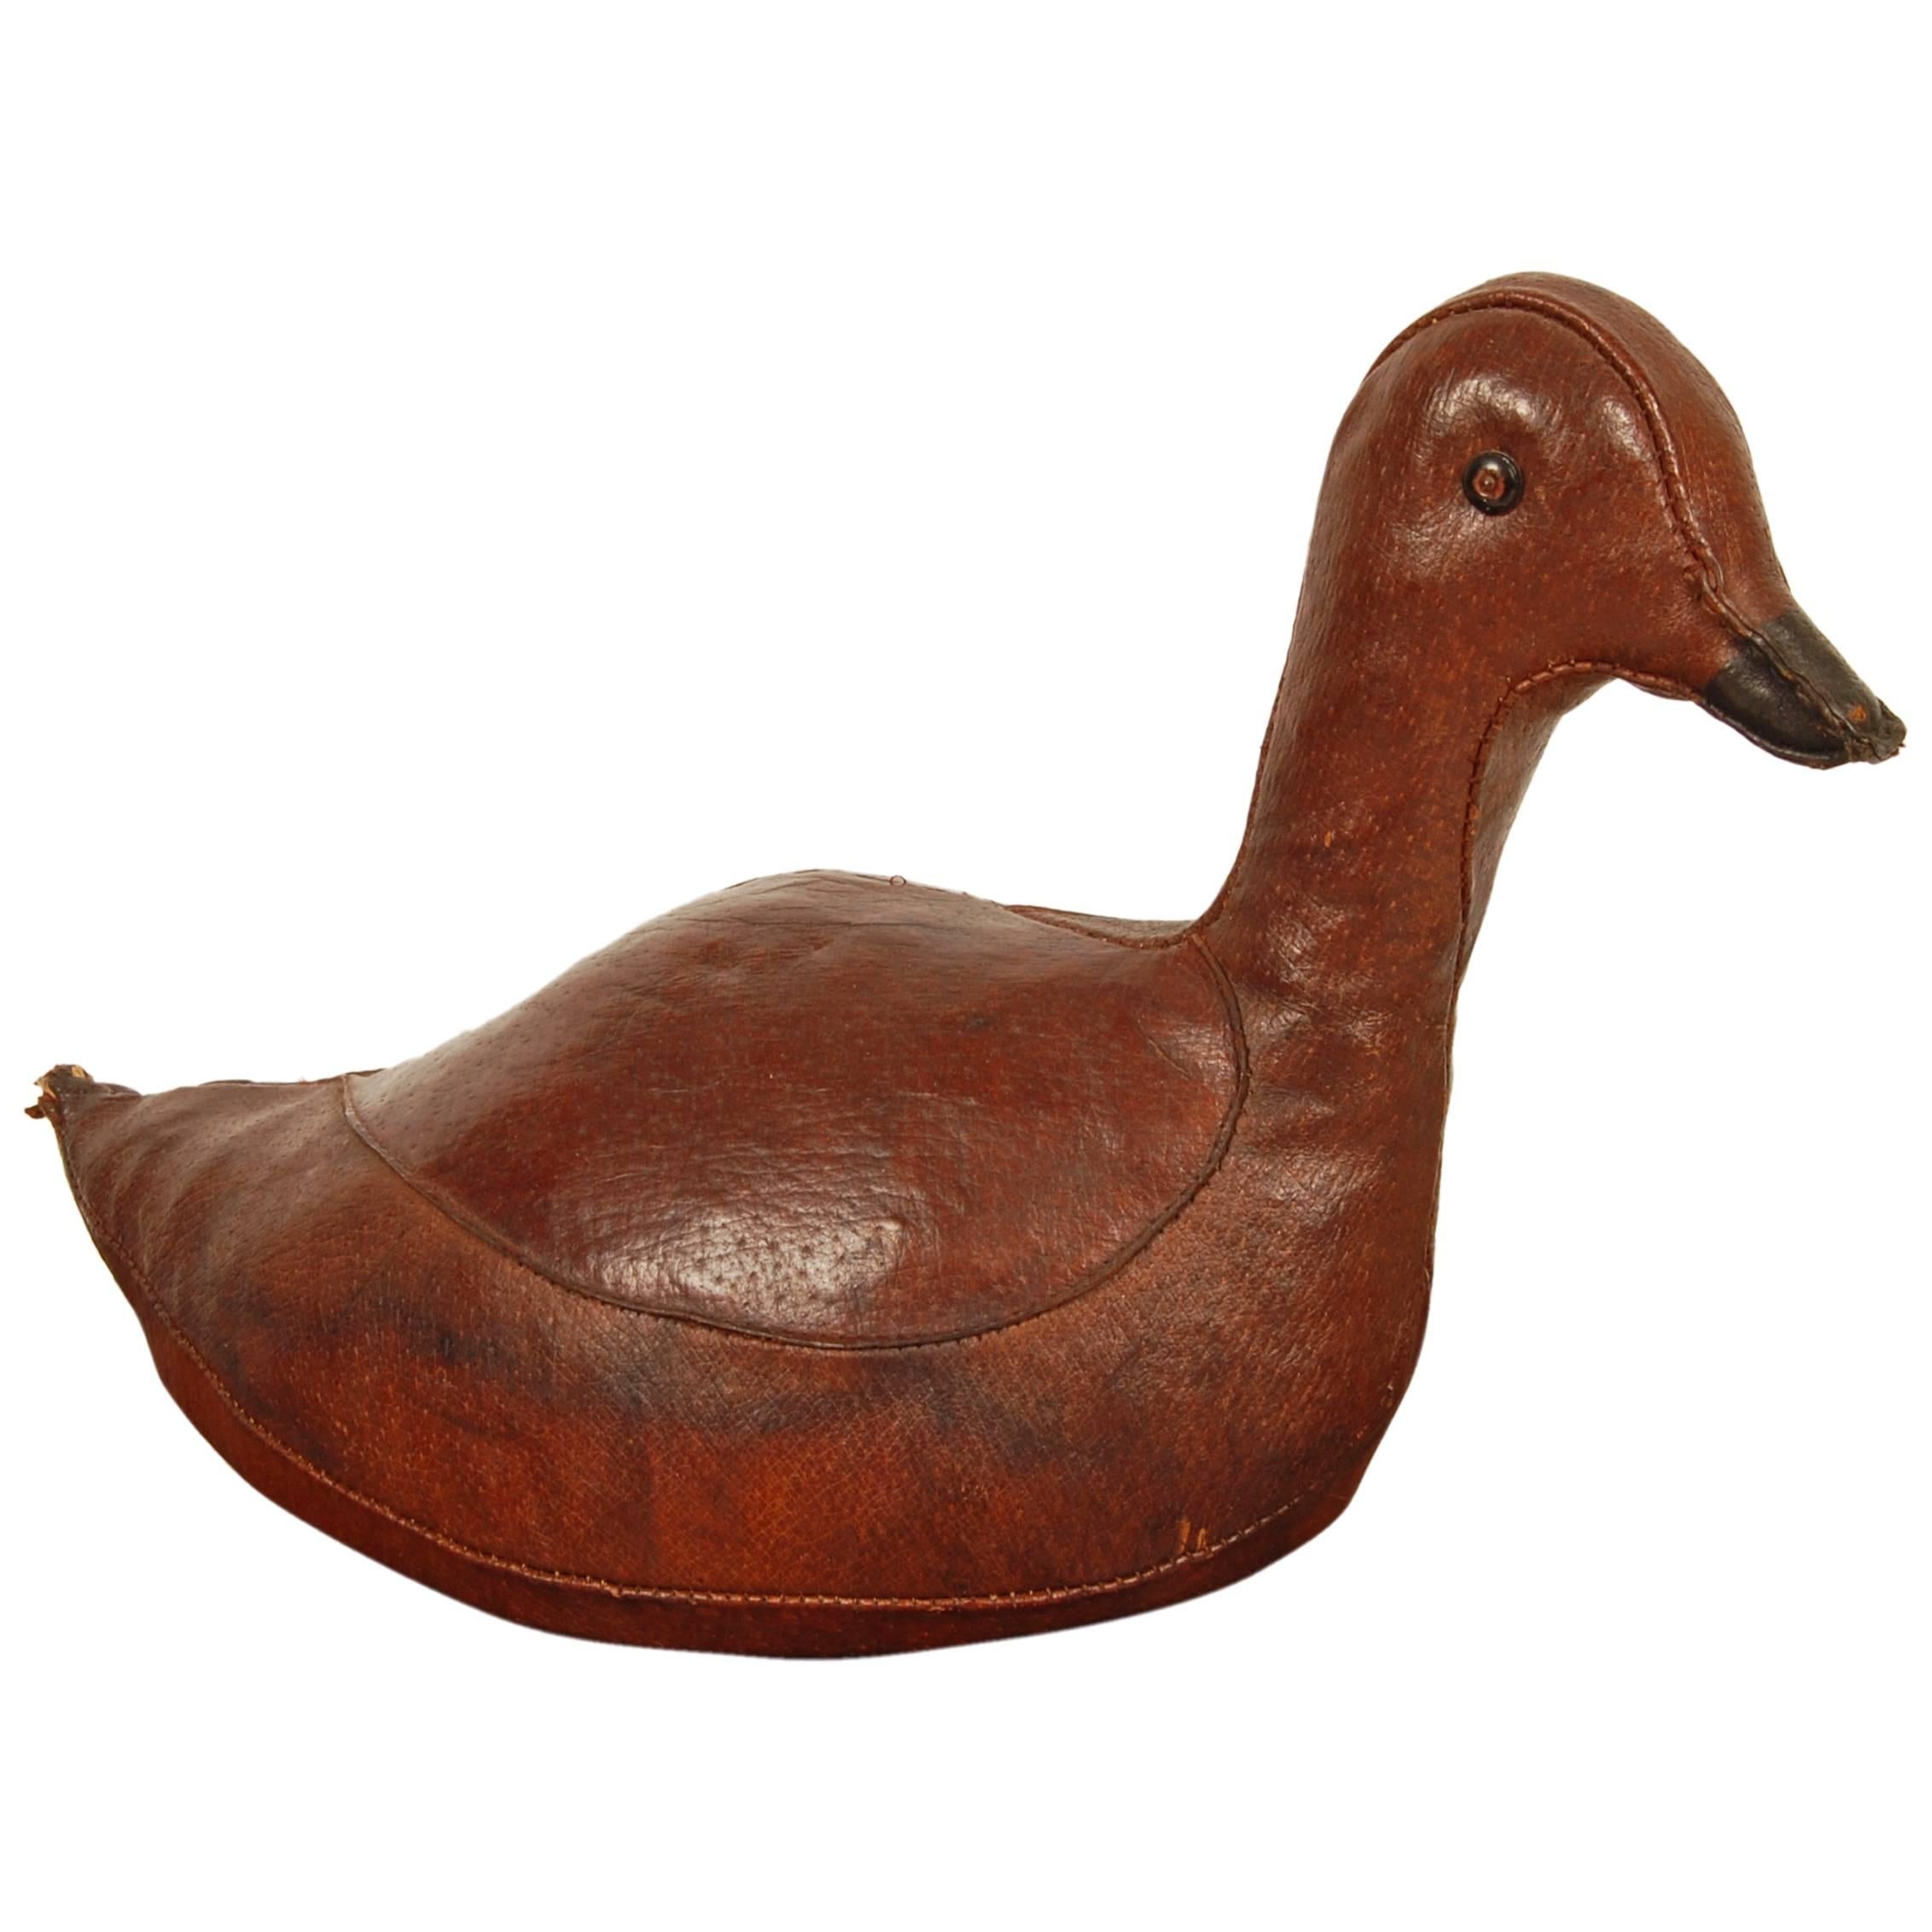 Abercrombie and Fitch Leather Duck Decoy